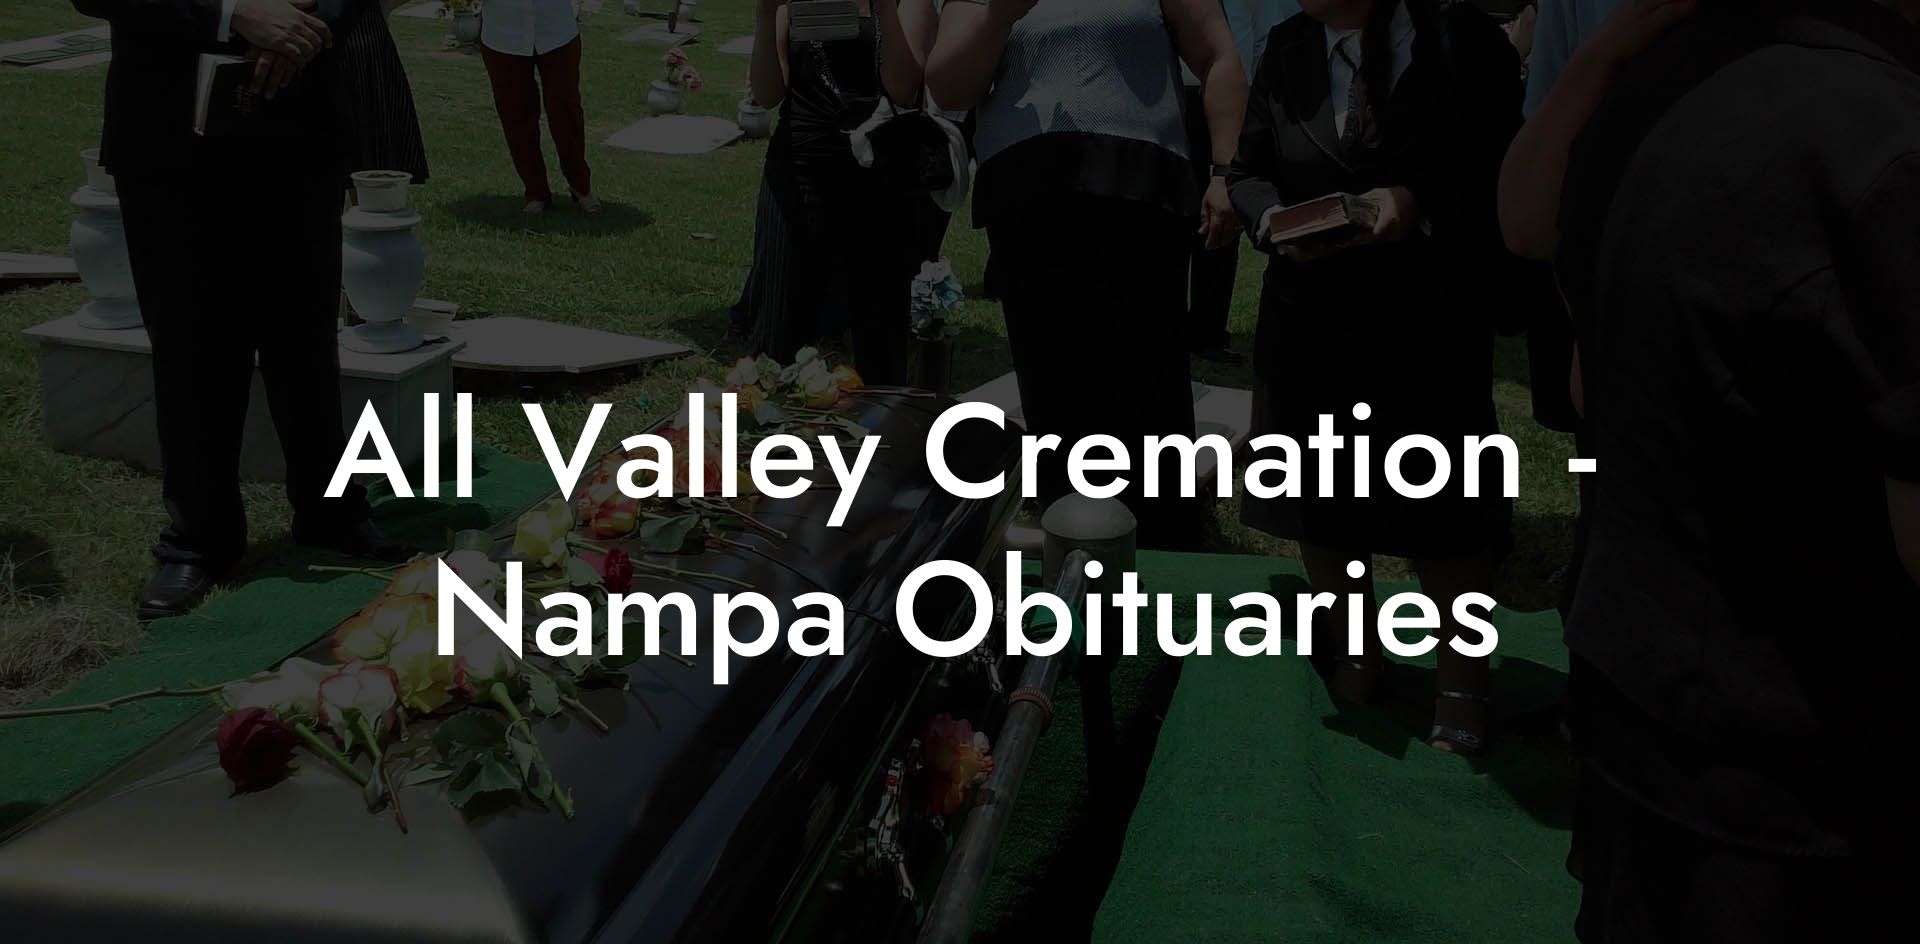 All Valley Cremation - Nampa Obituaries